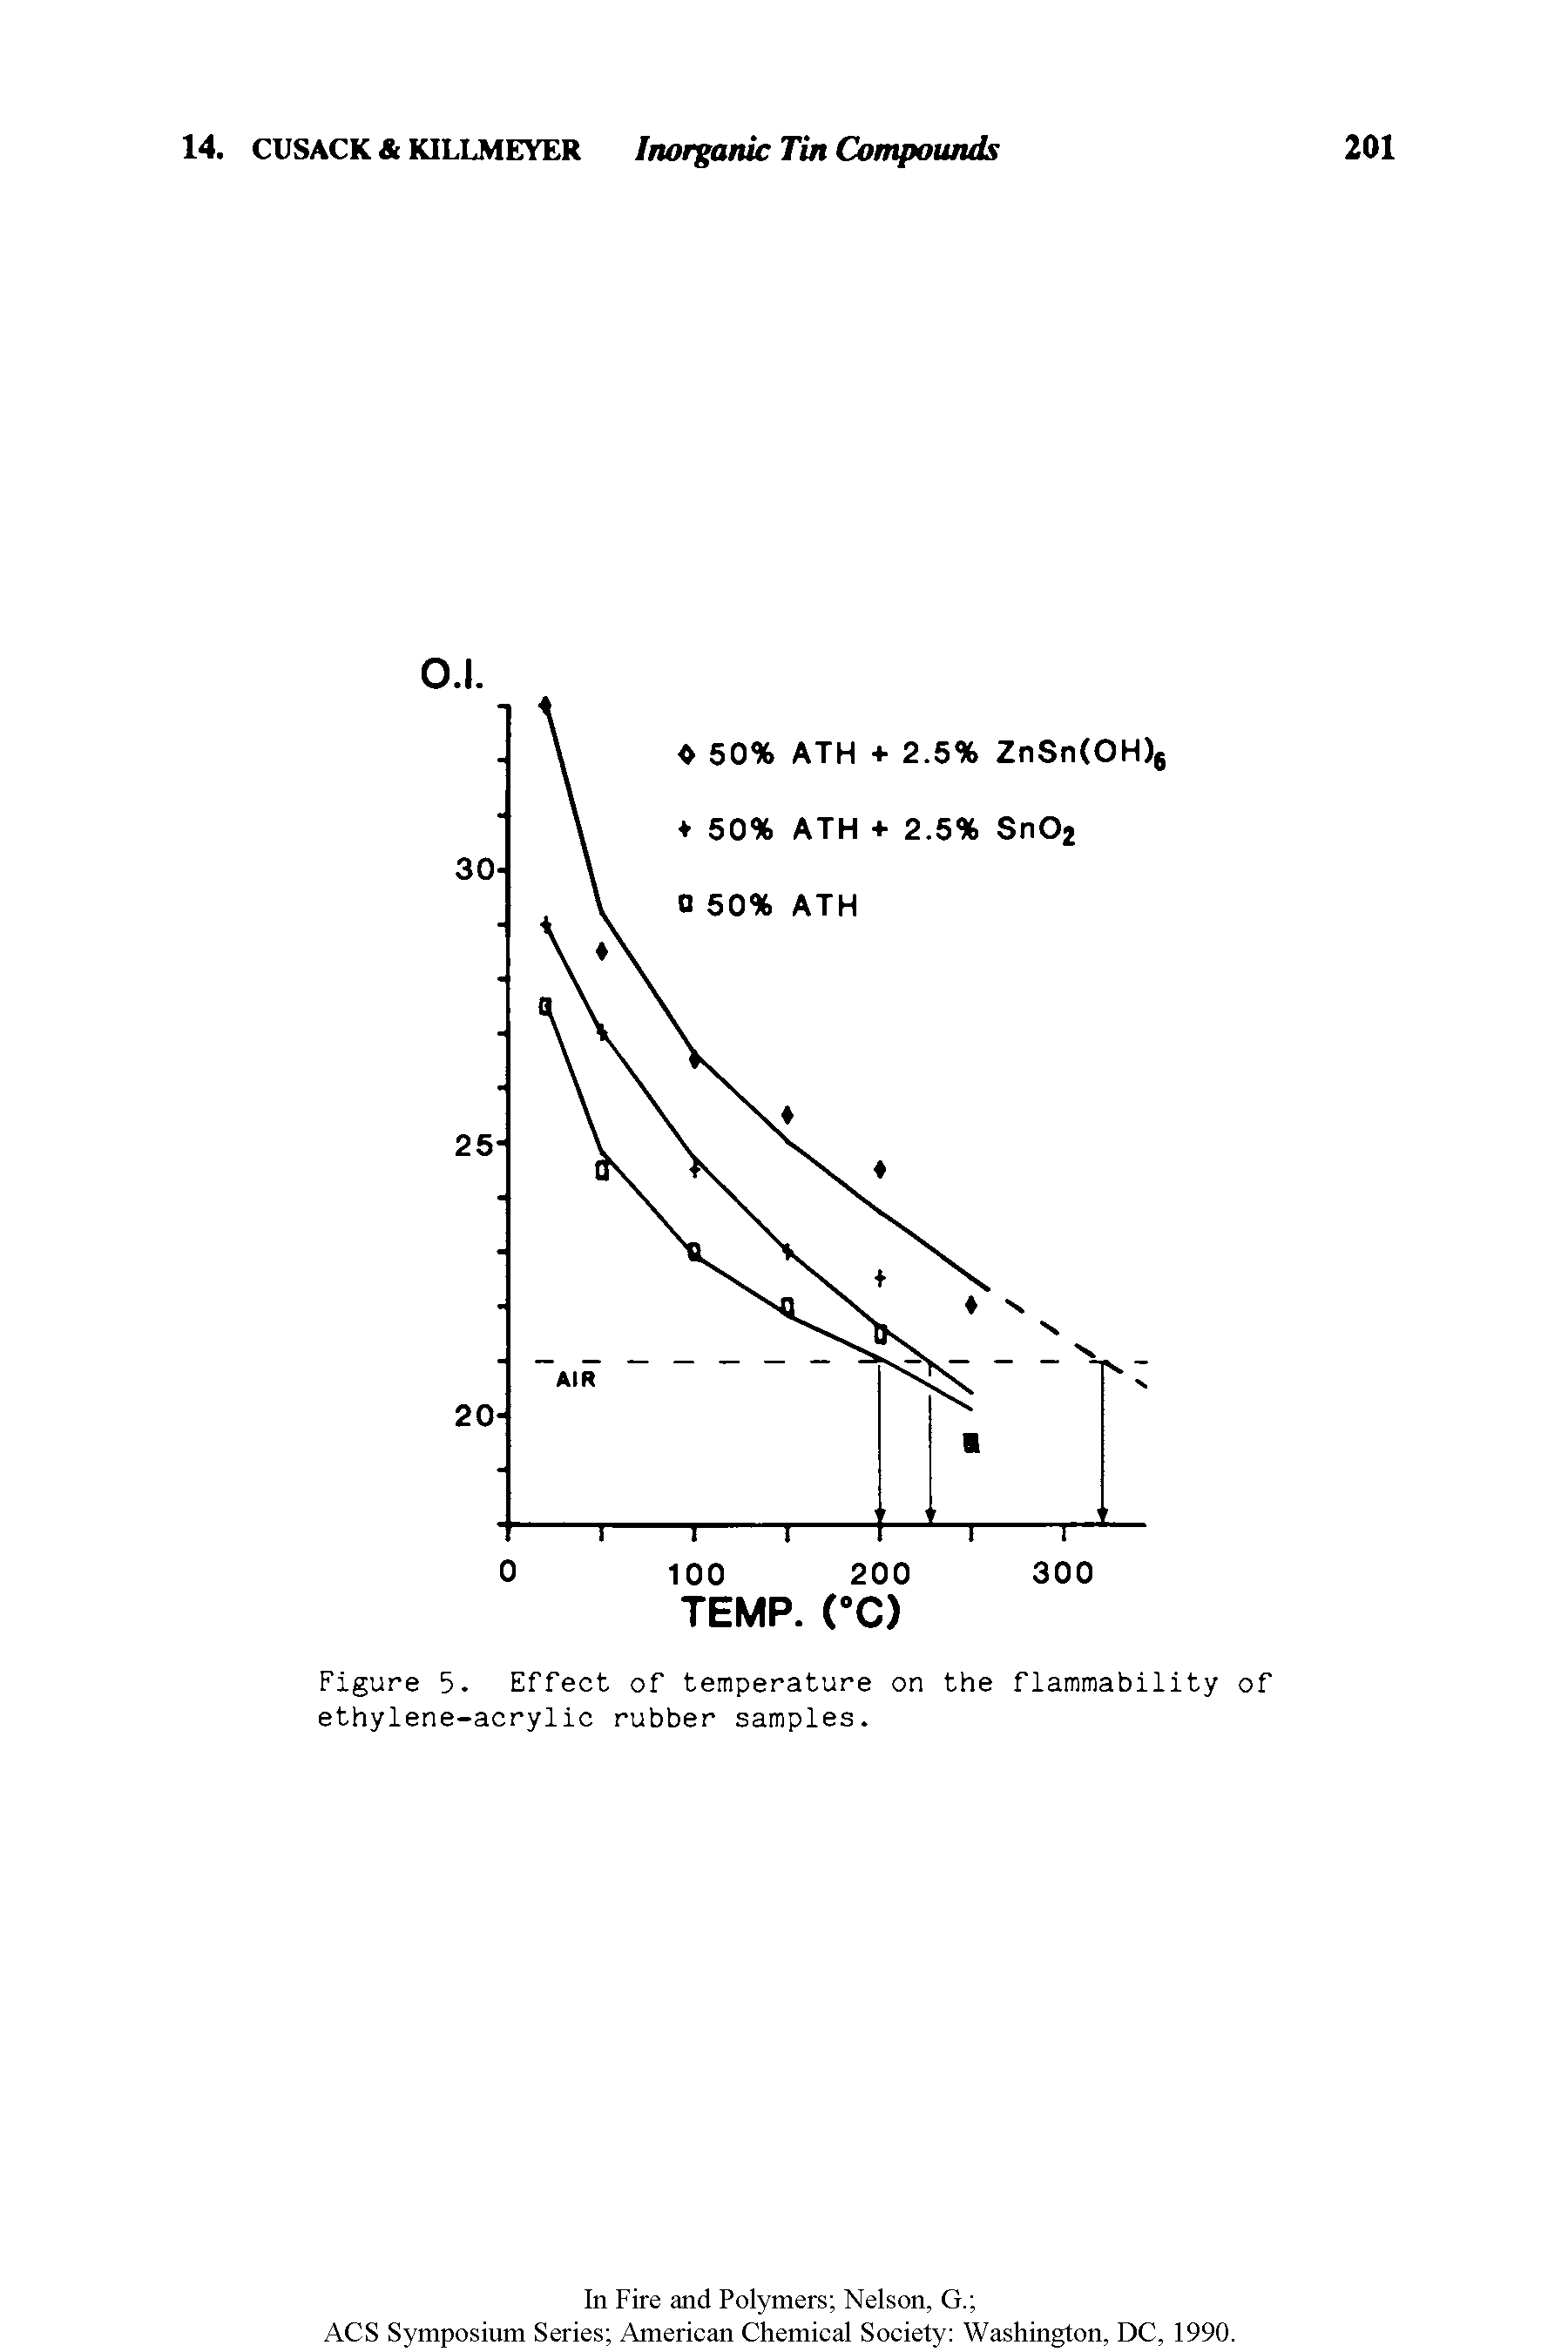 Figure 5. Effect of temperature on the flammability of ethylene-acrylic rubber samples.